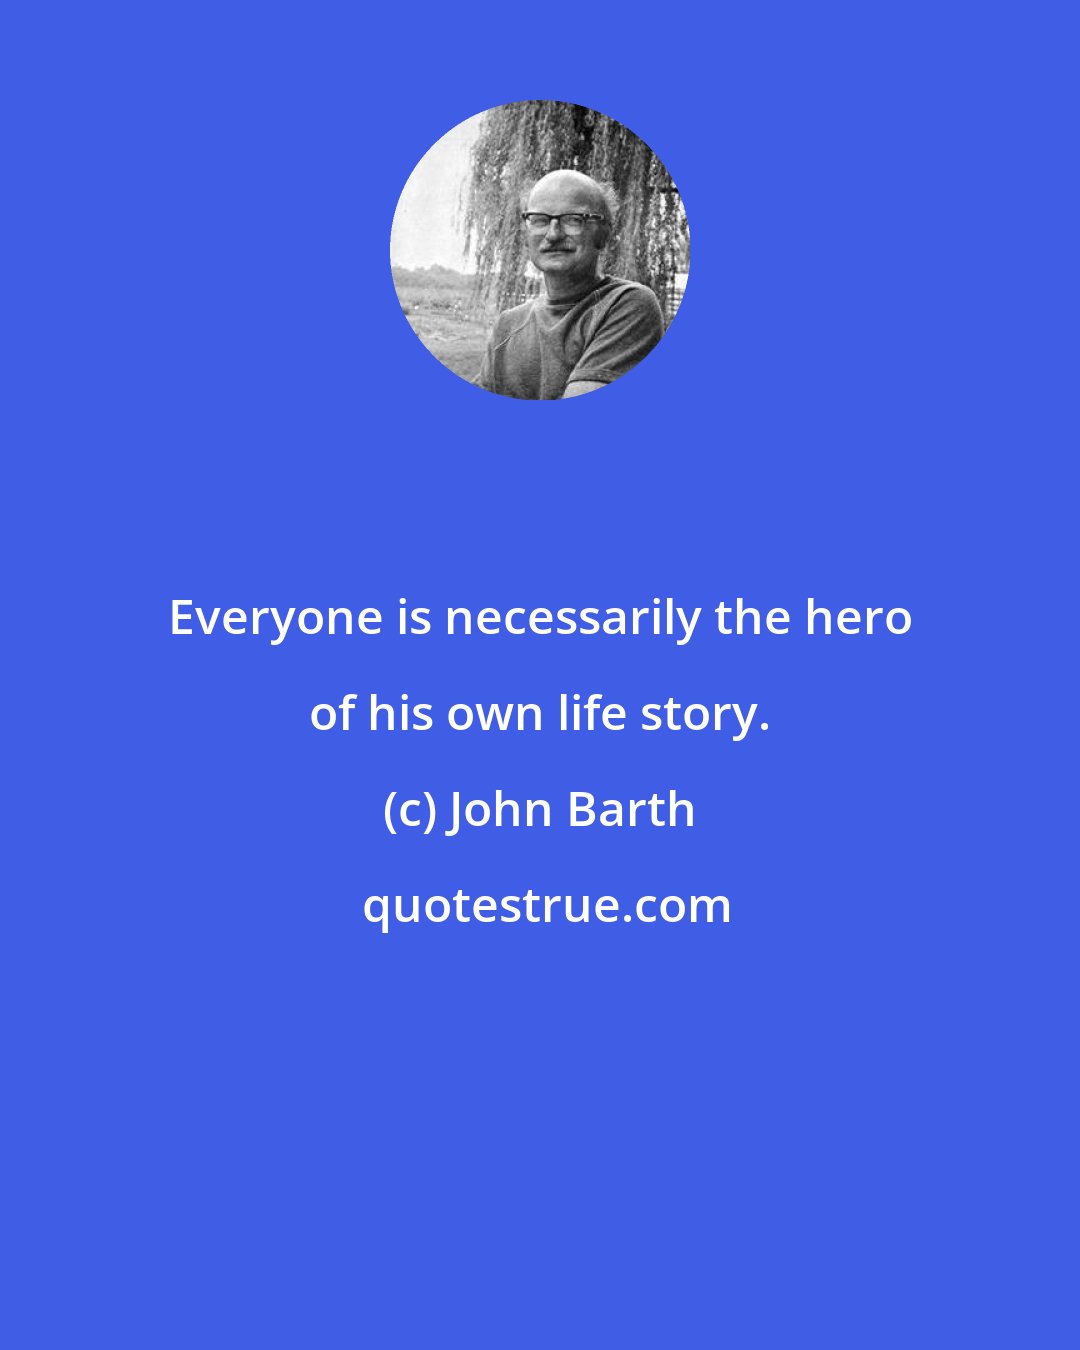 John Barth: Everyone is necessarily the hero of his own life story.